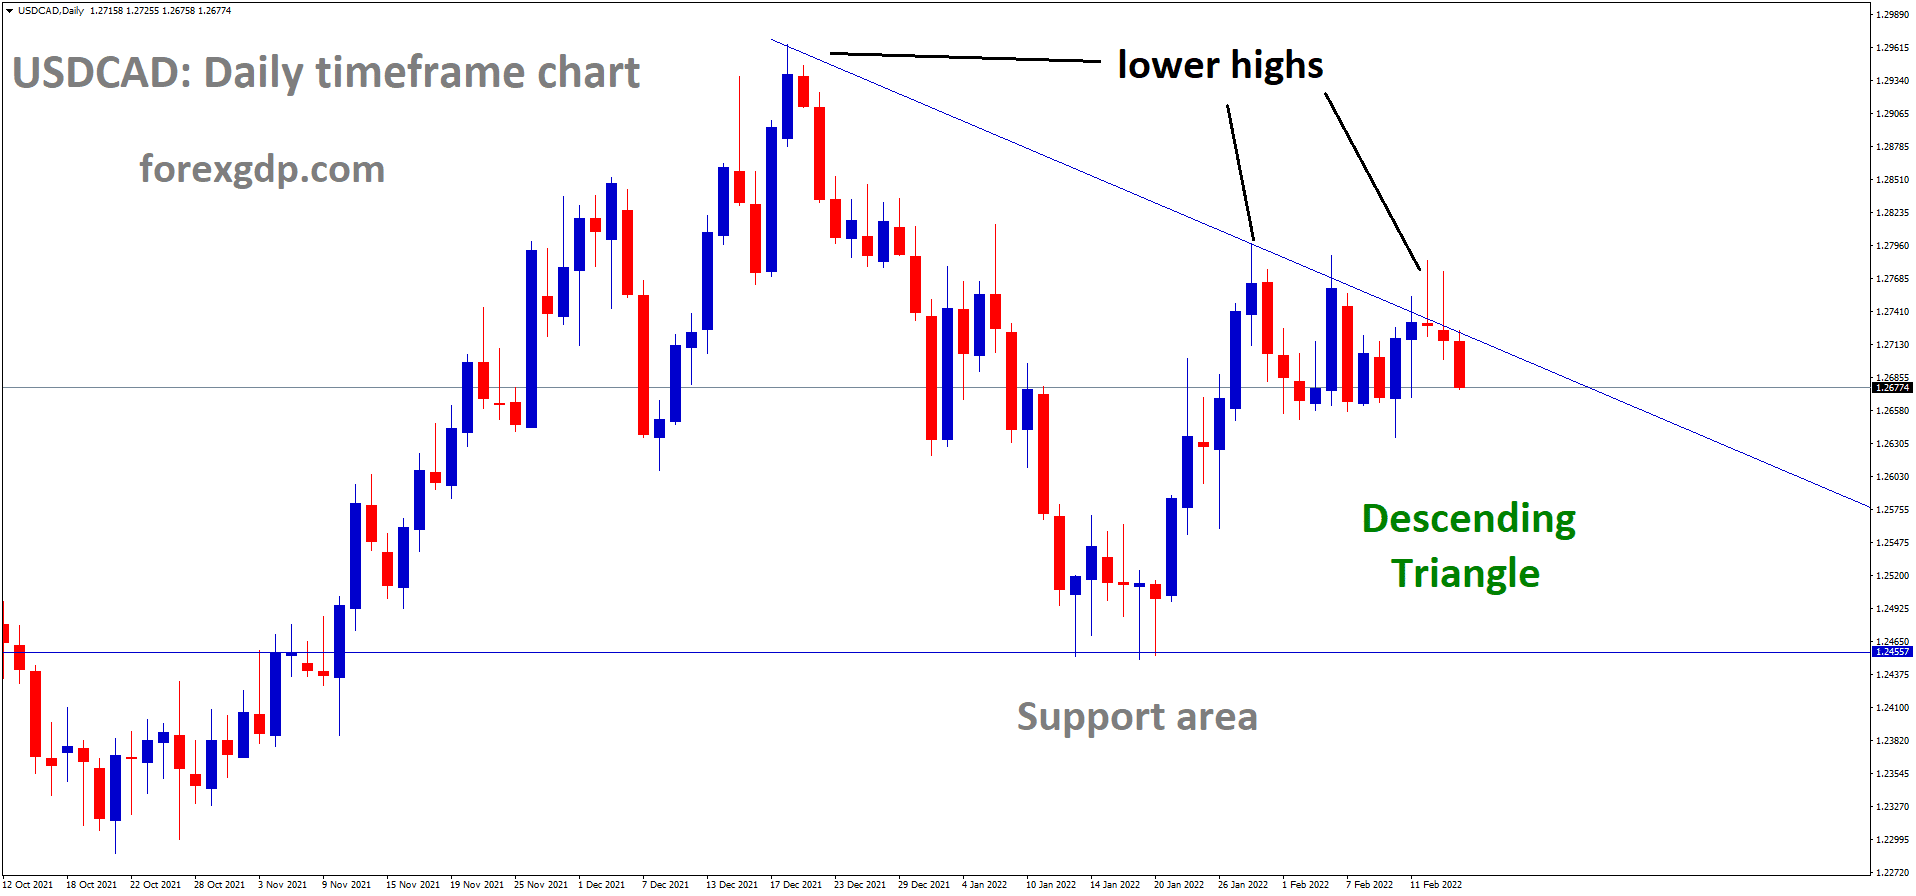 USDCAD is moving in the Descending triangle pattern and the market has fallen from the lower high area of the triangle pattern